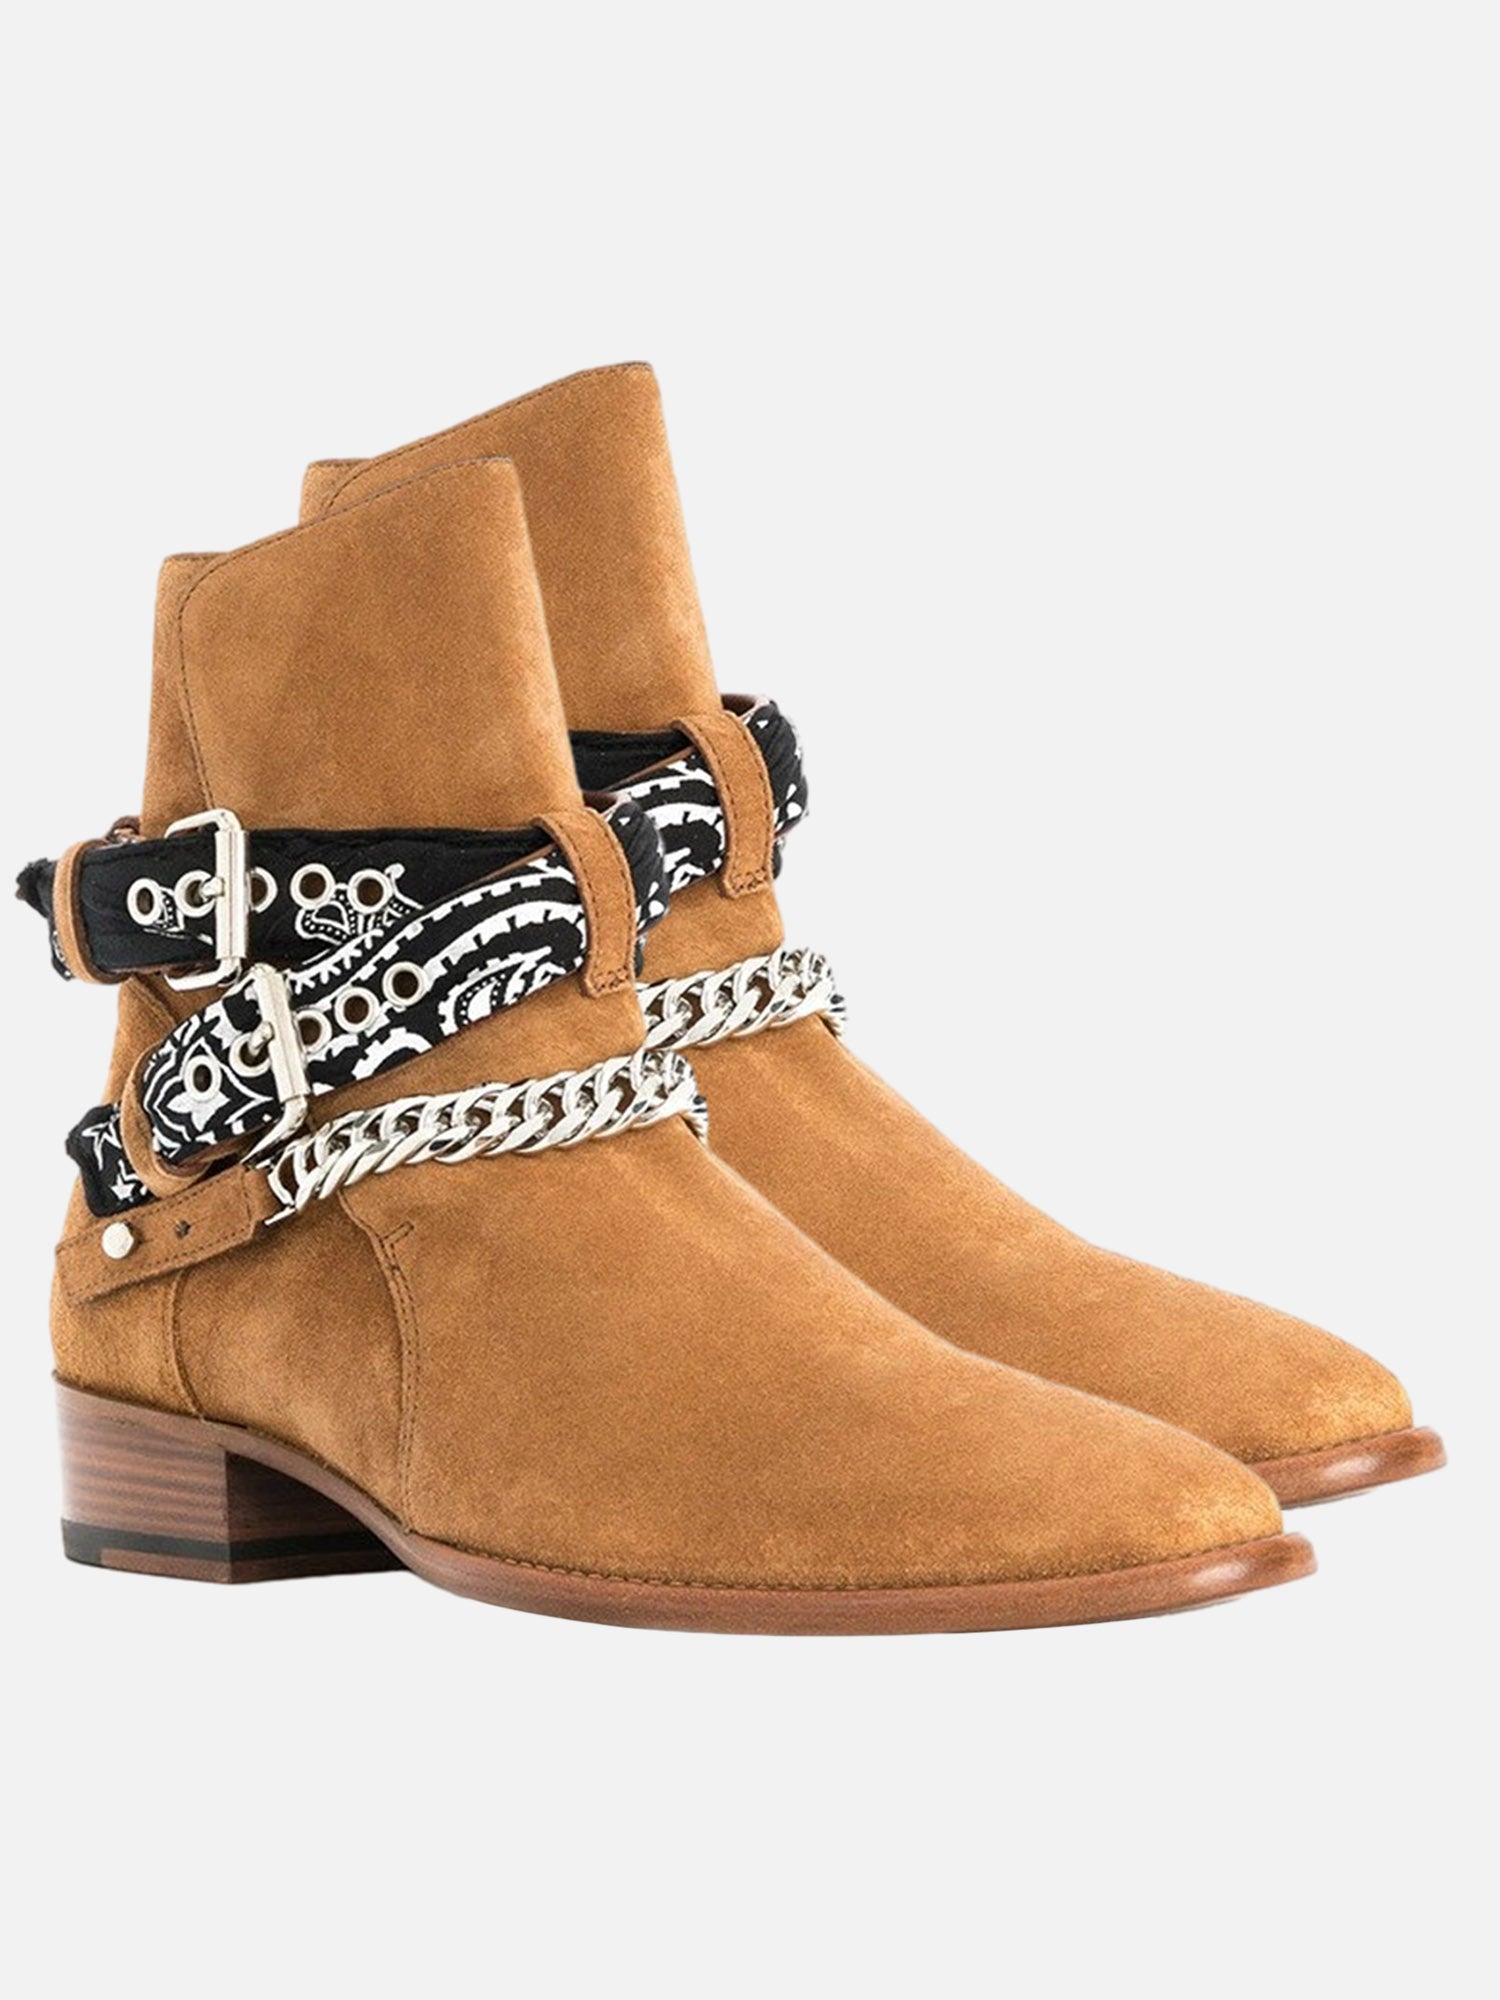 British Trend Buckle Waist Mid-calf Pointed Toe Chelsea Boots